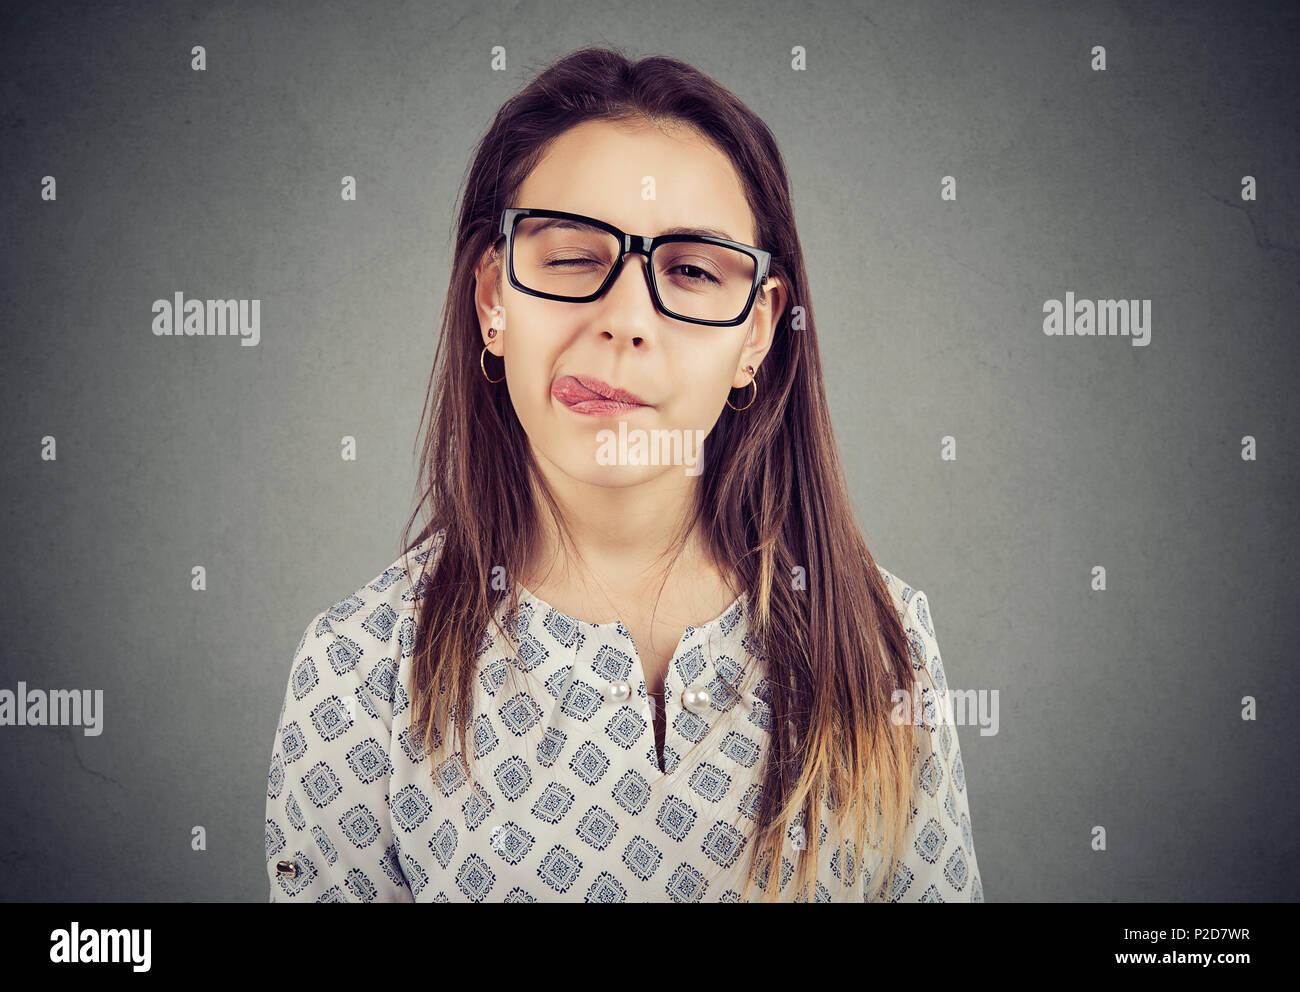 girl in glasses sticking out her tongue Stock Photo